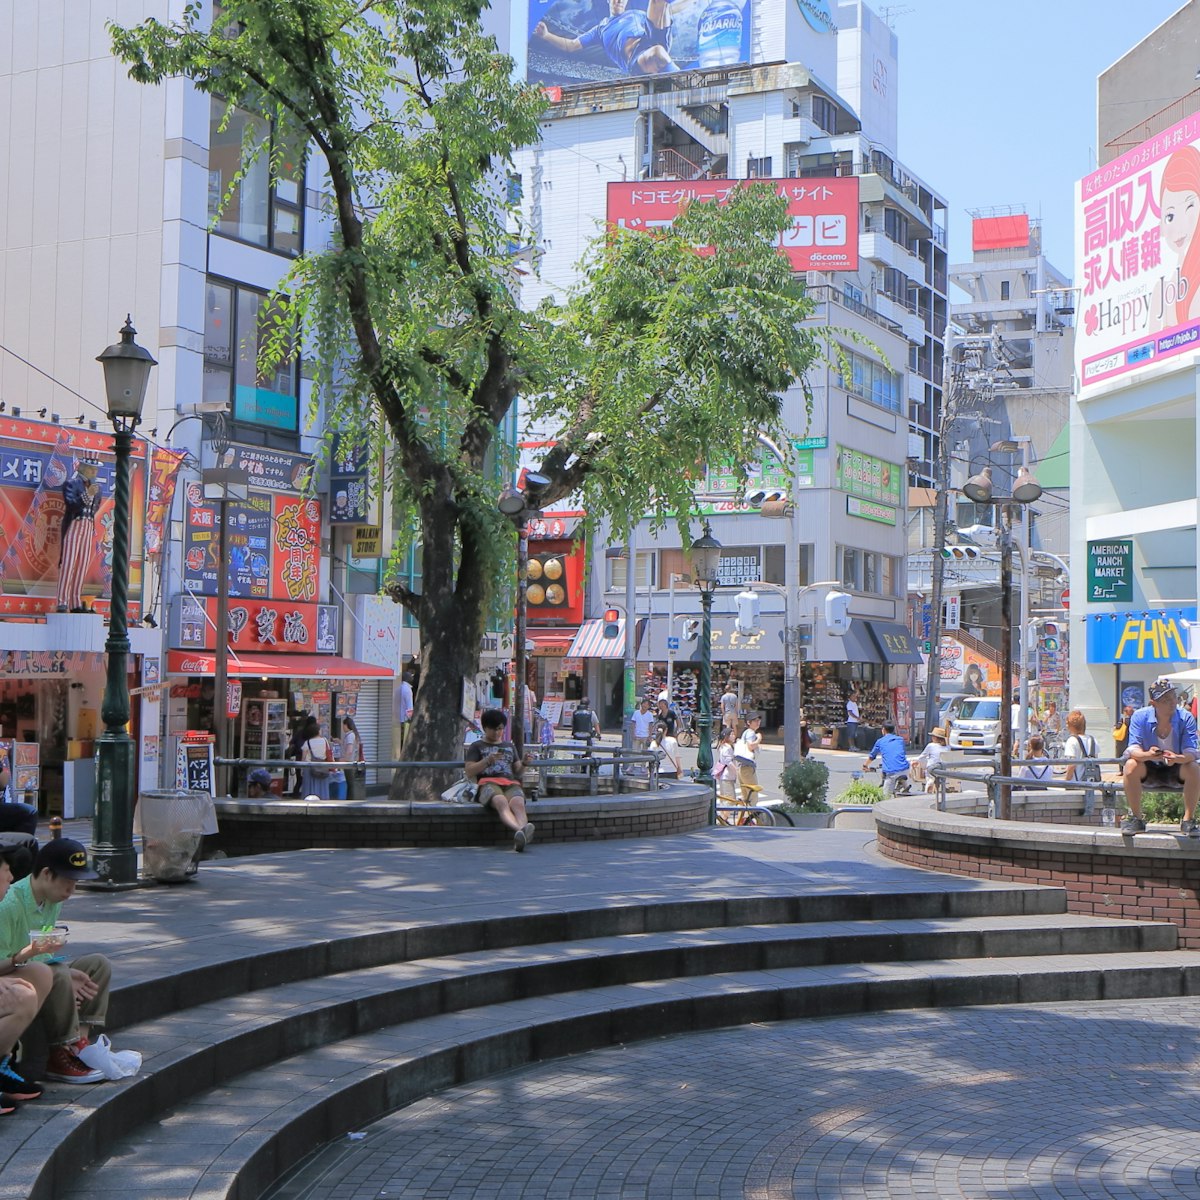 OSAKA JAPAN - 19 JUNE, 2014:Americamura district. Americamura, America village is a sizeable retail and entertainment area near Shinsaibashi Osaka. ; Shutterstock ID 207294088; Your name (First / Last): Laura Crawford; GL account no.: 65050; Netsuite department name: Online Editorial; Full Product or Project name including edition: Osaka city app POI images